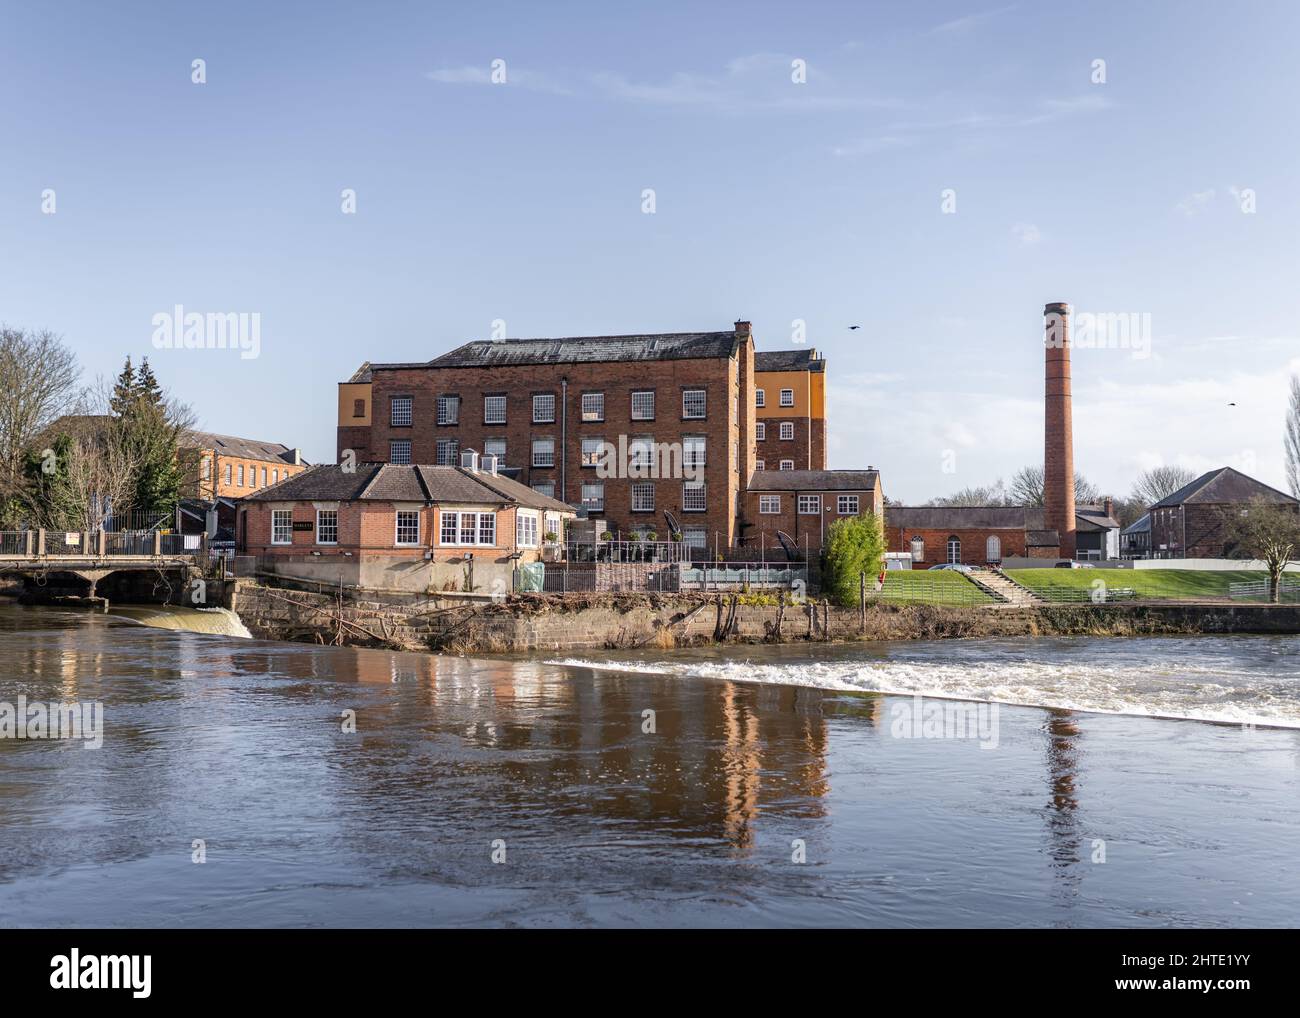 The West Mill on the river Derwent at Derby Abby. Fast flowing beautiful river and old mill warehouse with red brick chimney. Stock Photo